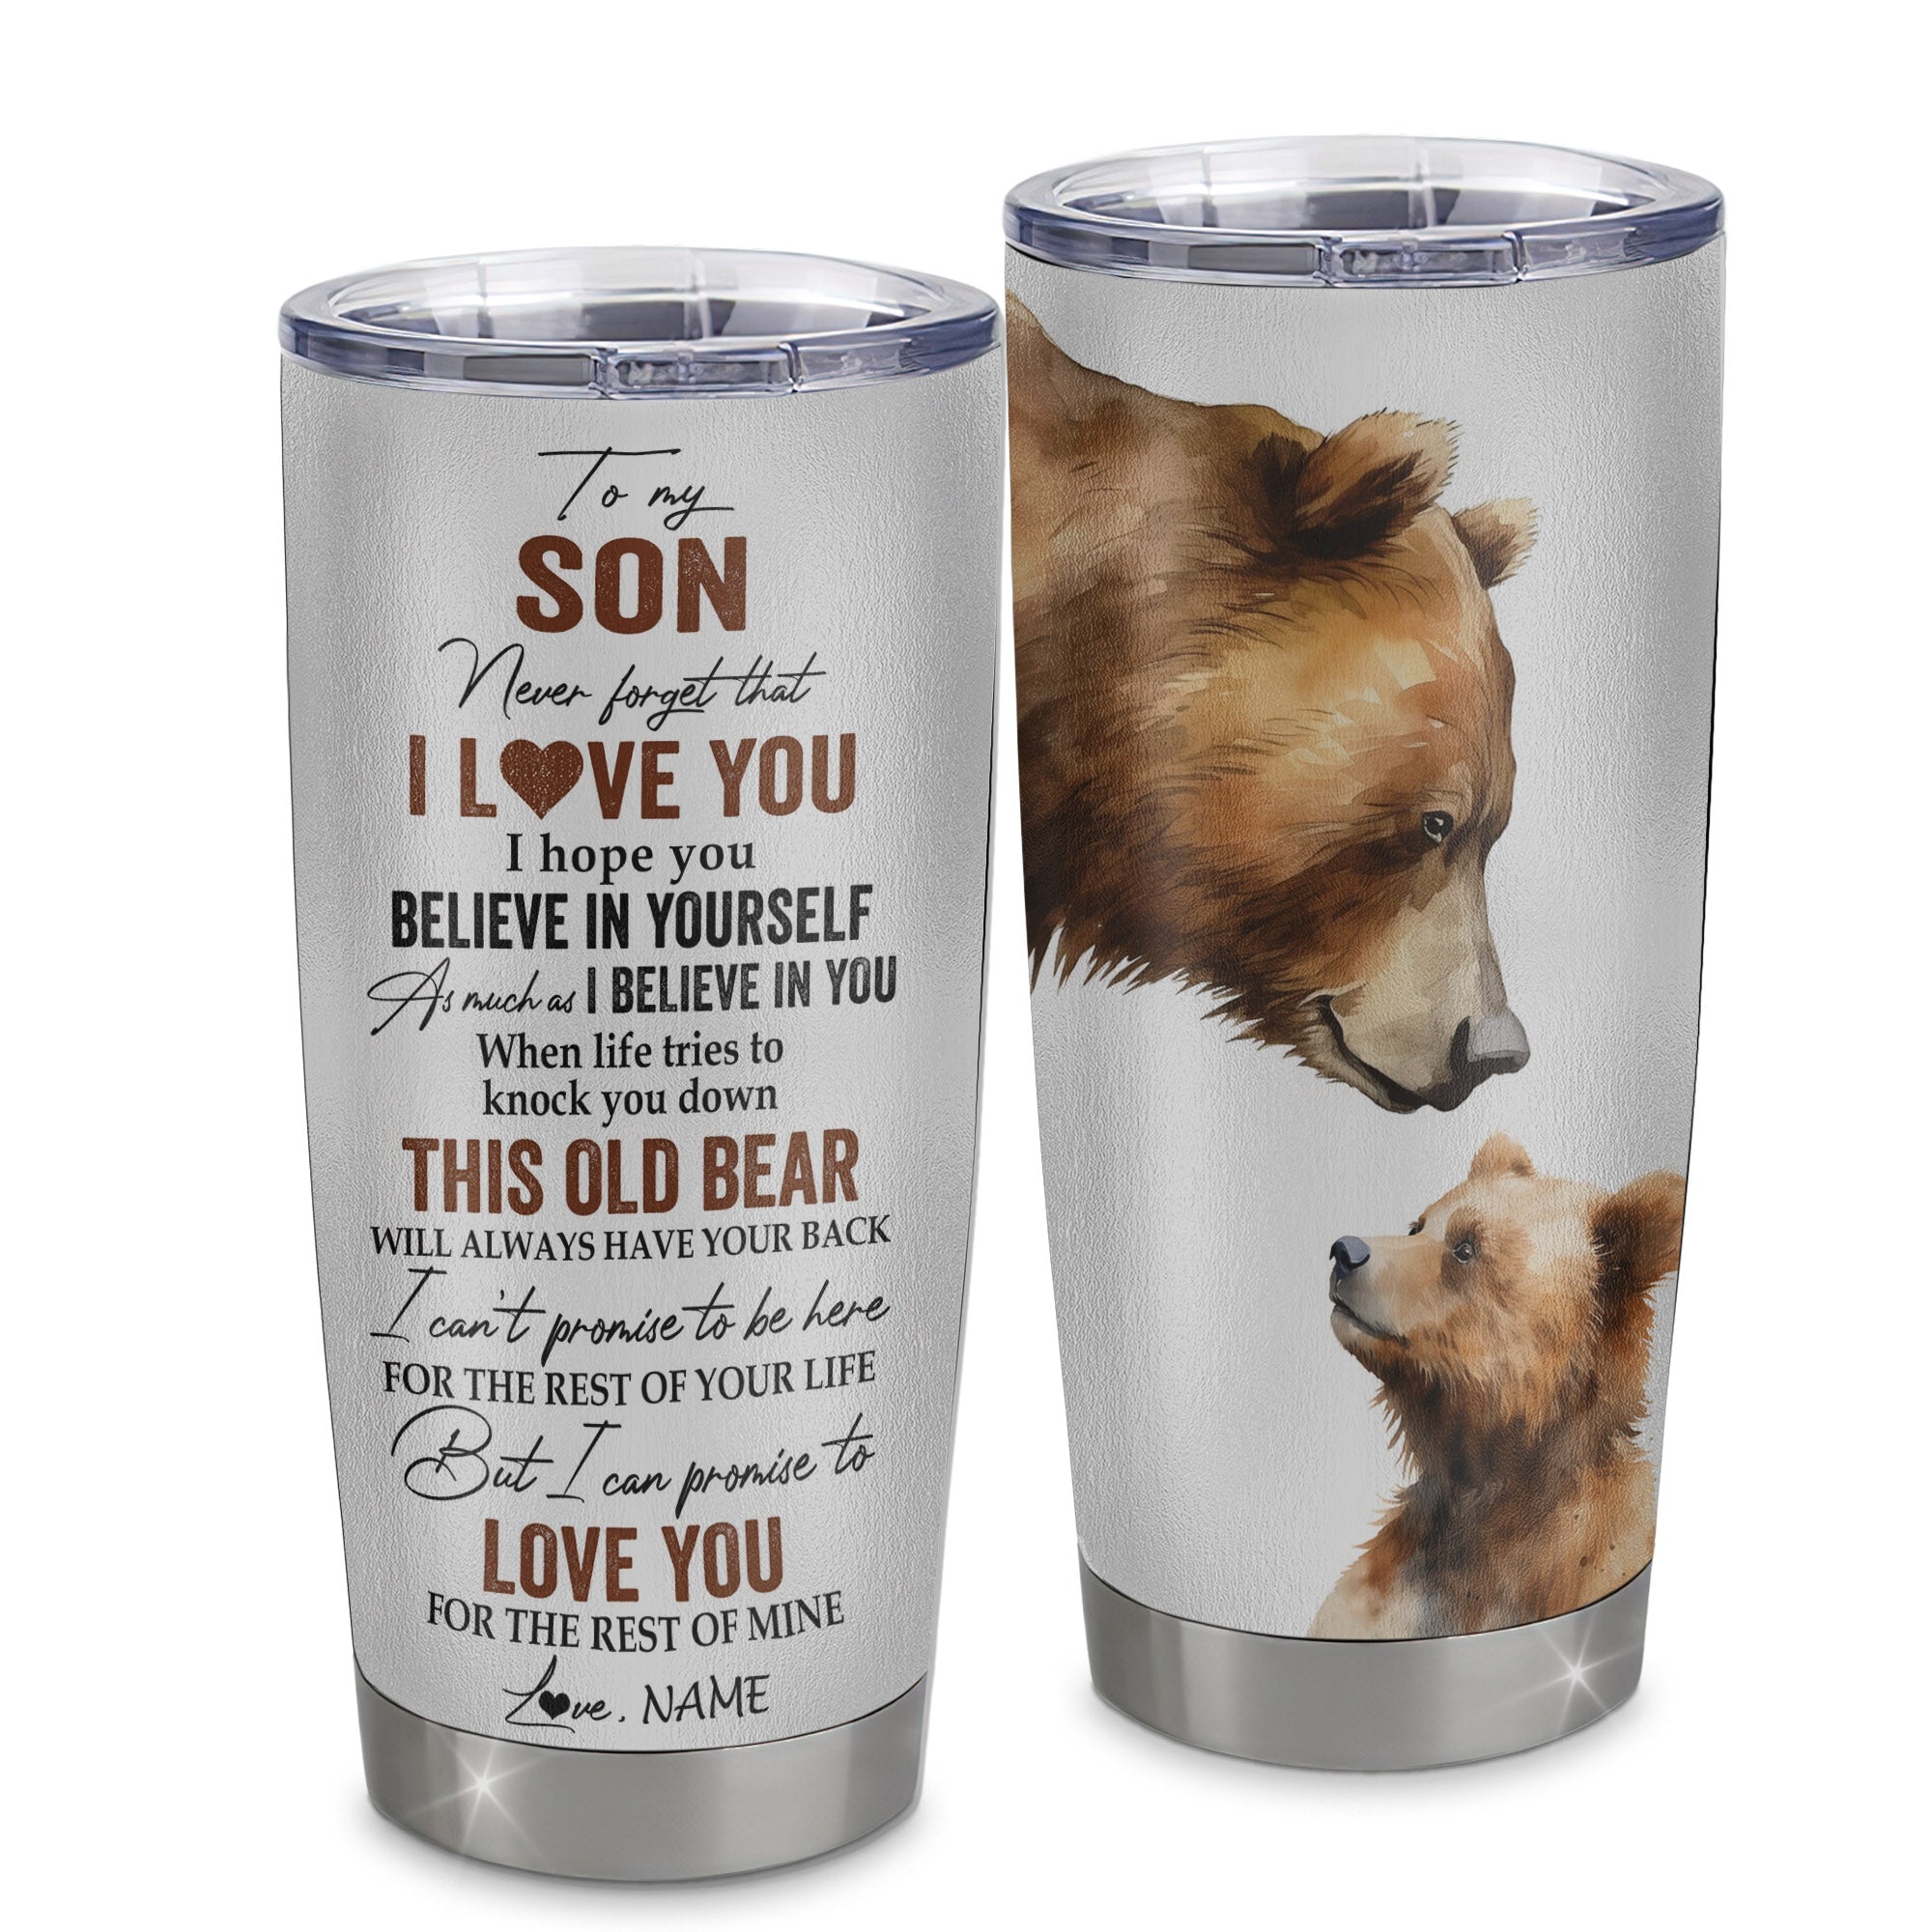 To My Mom, I Will Always Be Your Little Boy - Tumbler Cup